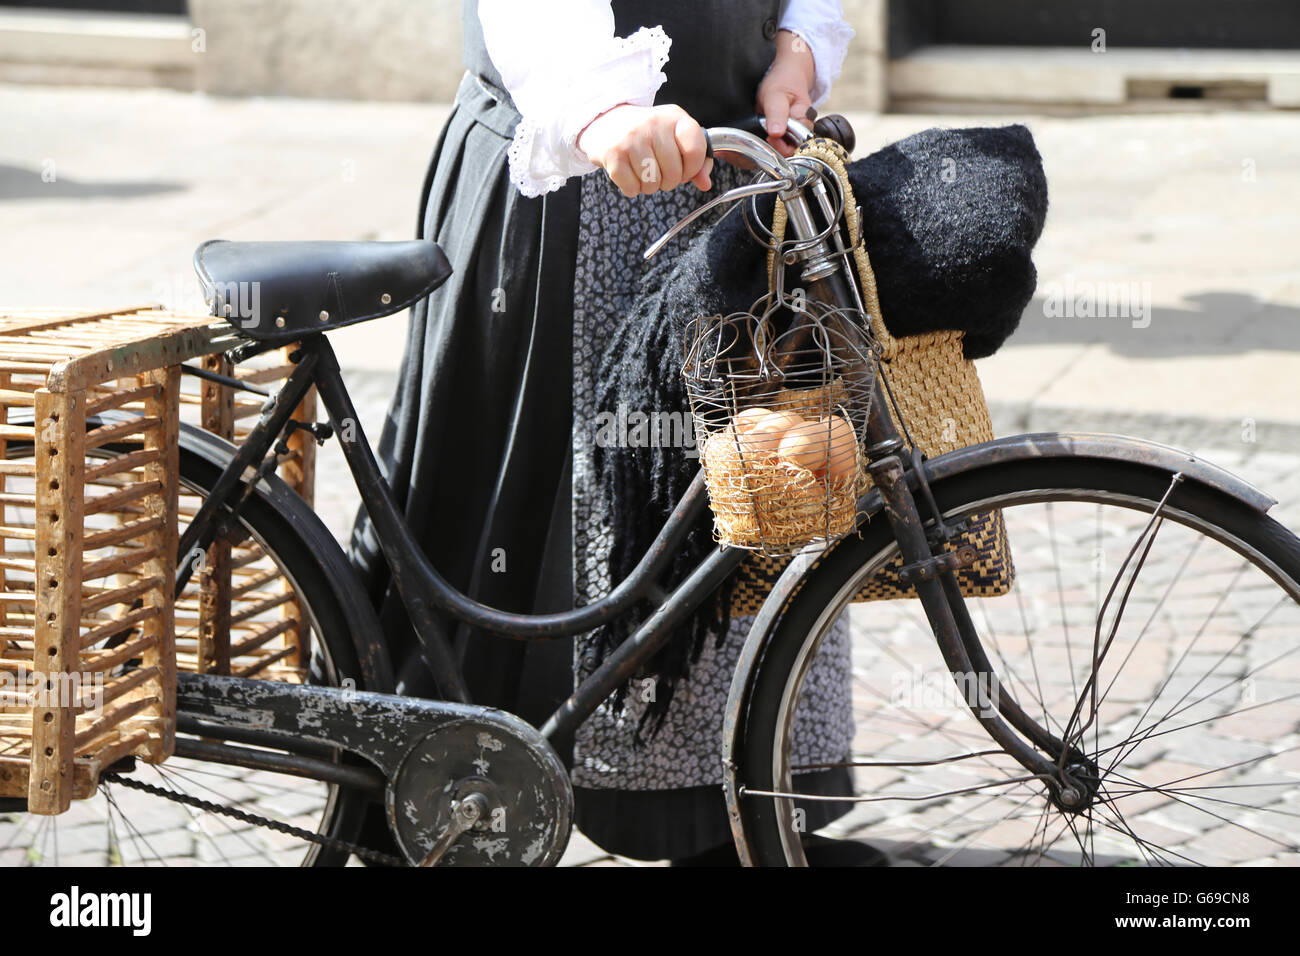 elderly woman on bicycle with a basket full of fresh eggs Stock Photo